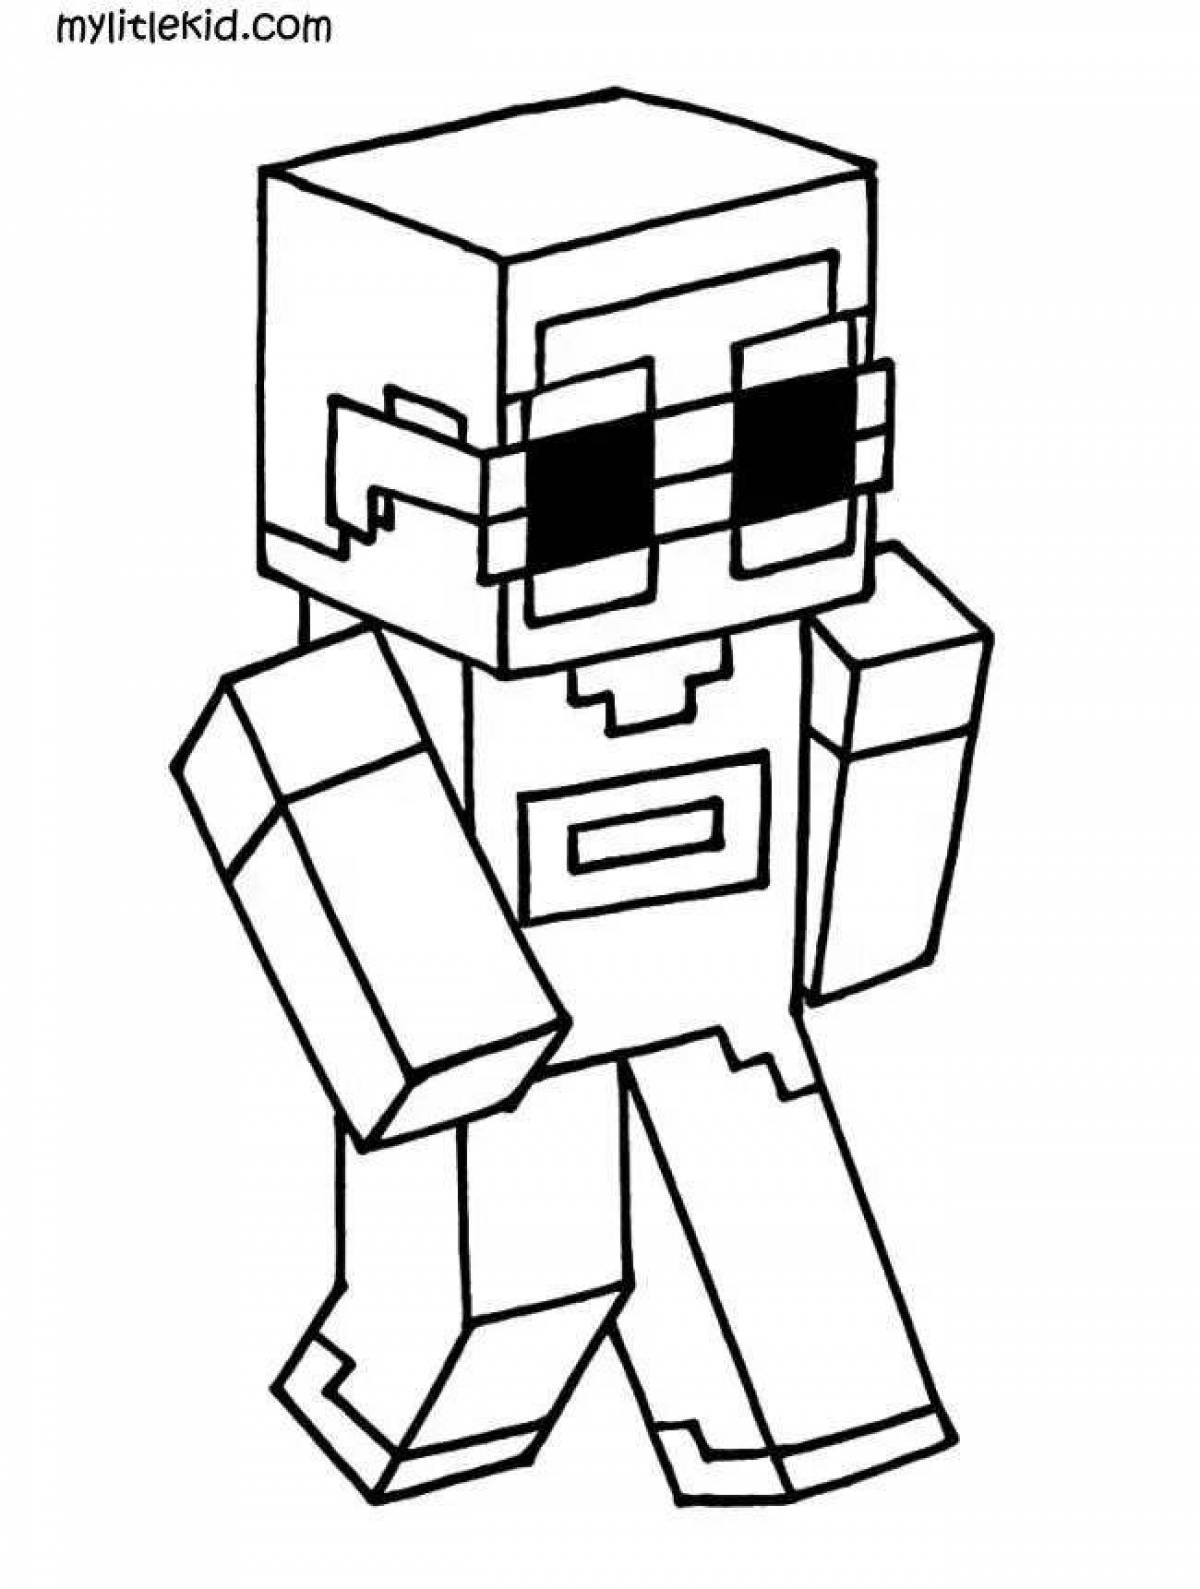 Cute minecraft skins coloring page